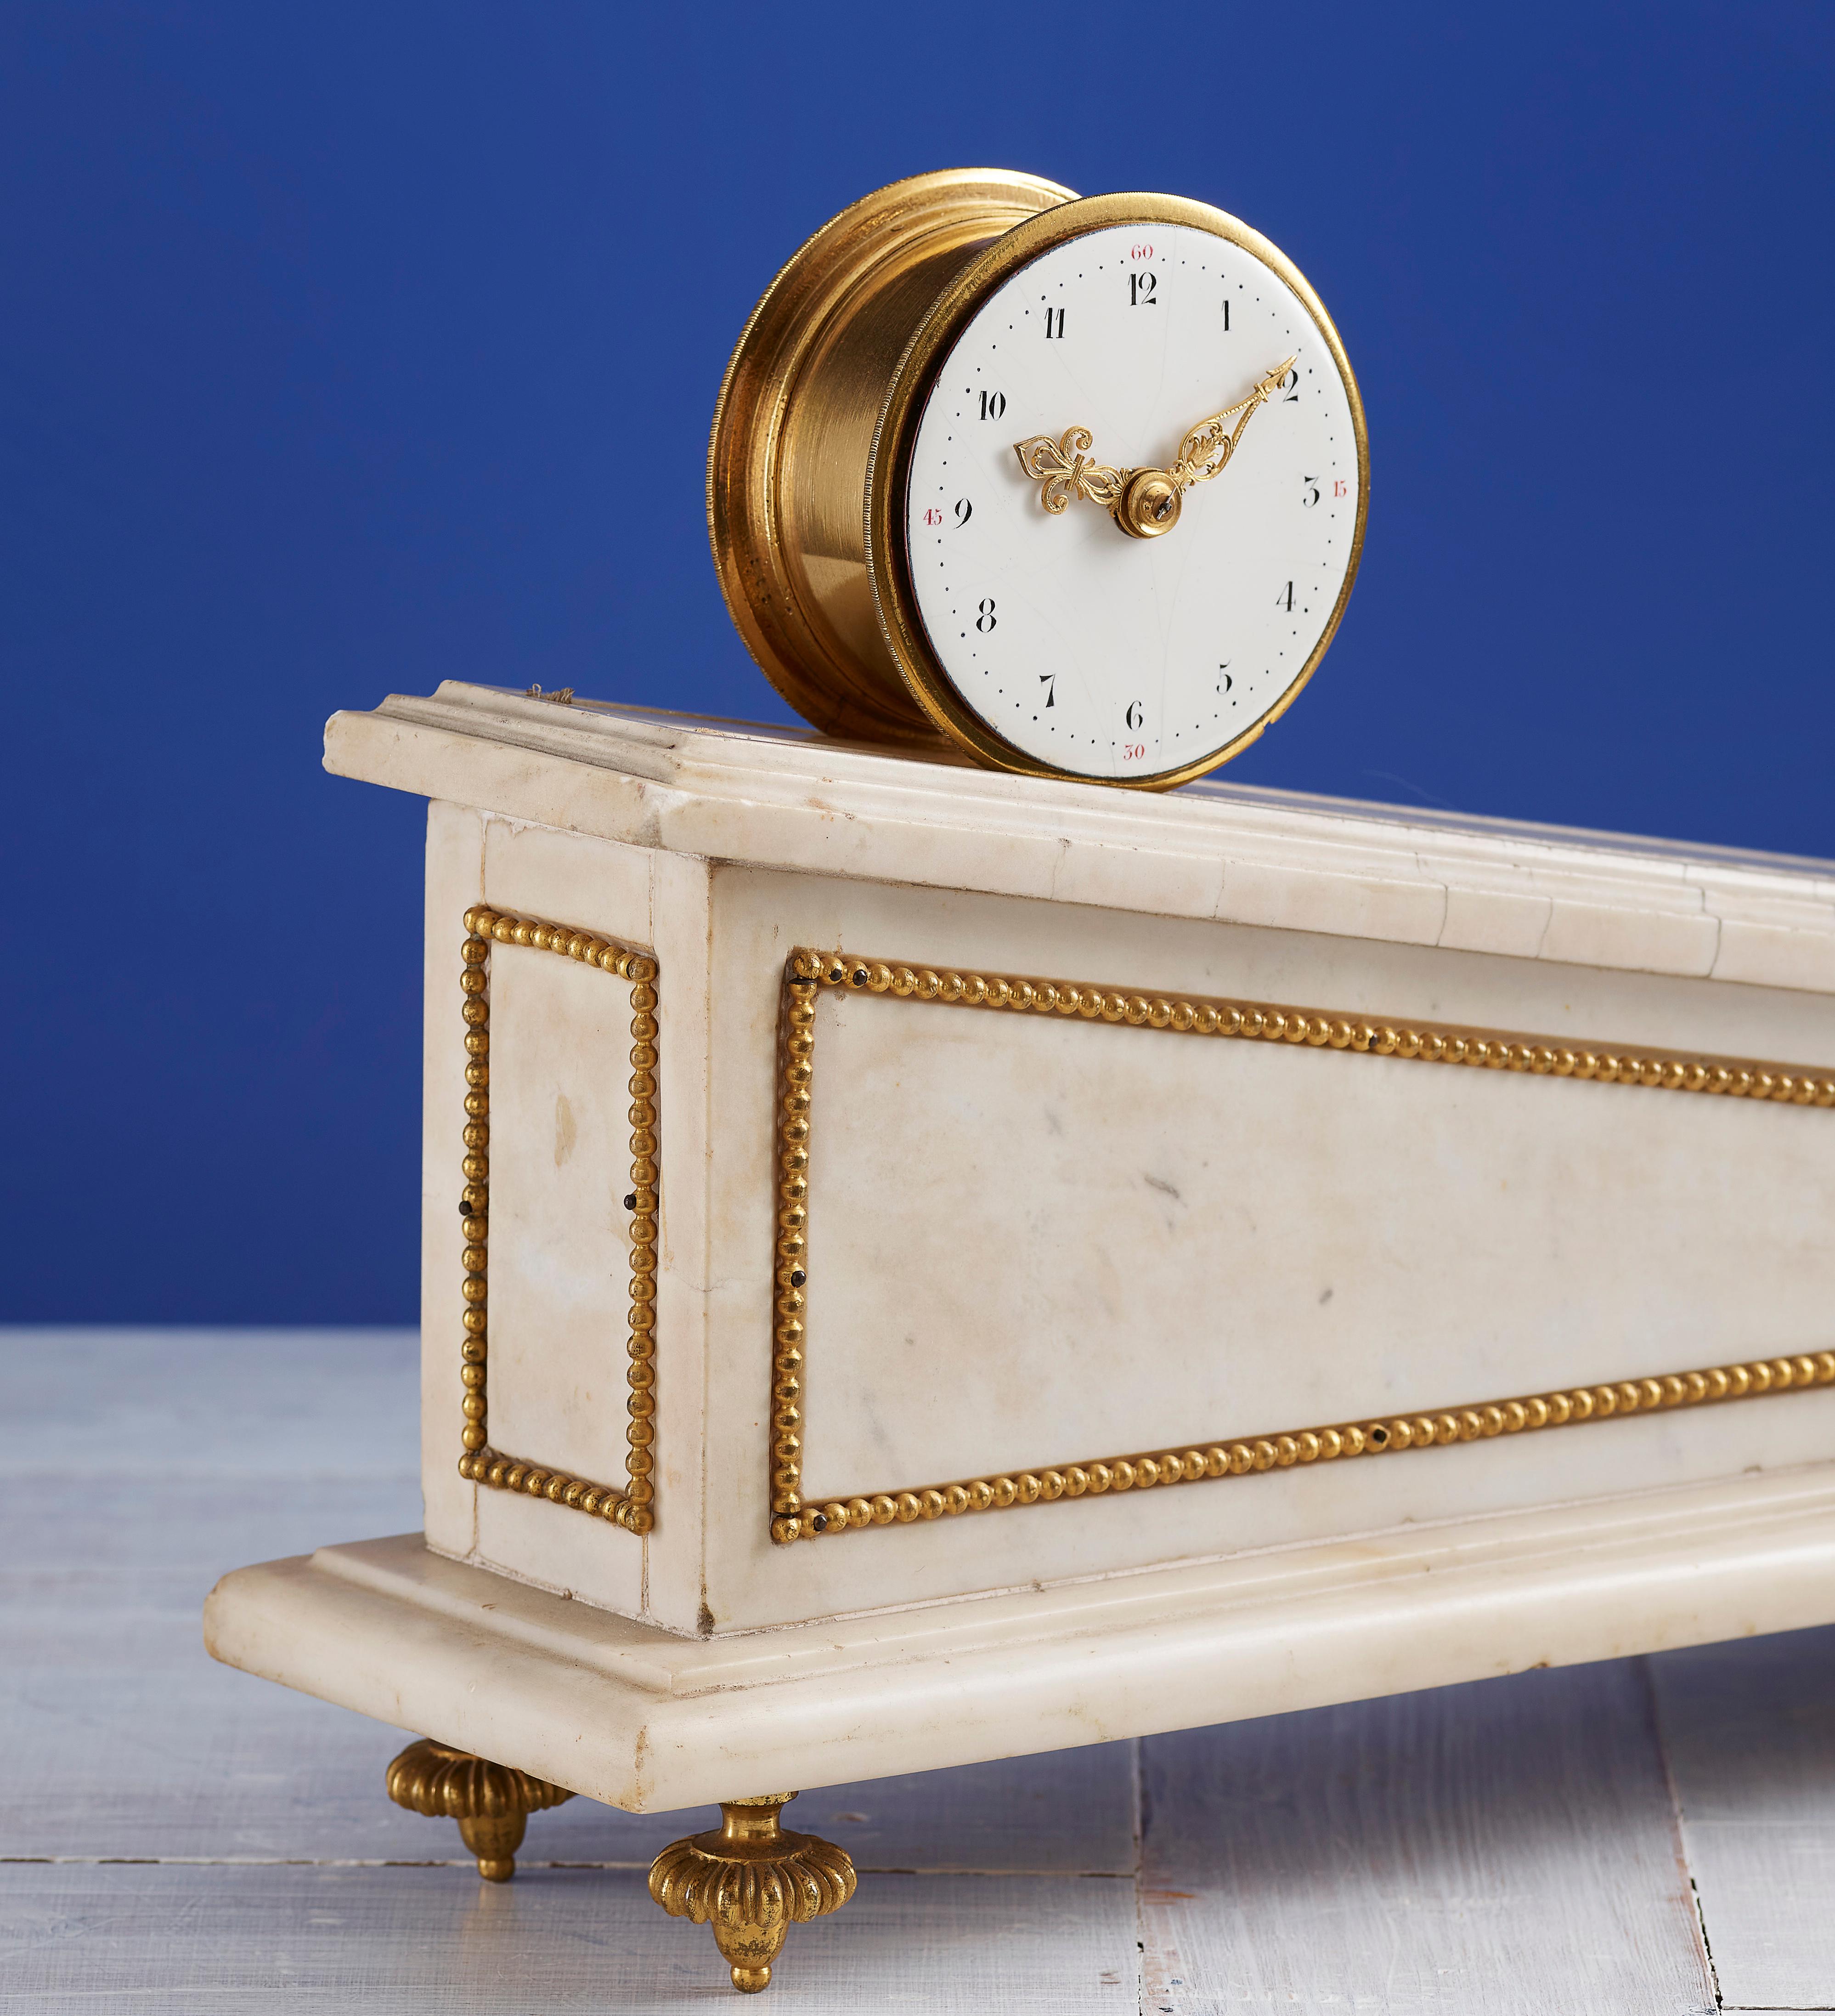 An extremely rare Louis XVI mantel clock 'a cremaillere', a movement driven by its own weight, where the moving drum barrel is running down an inclined white marble base (runs for about three days), mounted with ormolu beading, on toupie feet. The